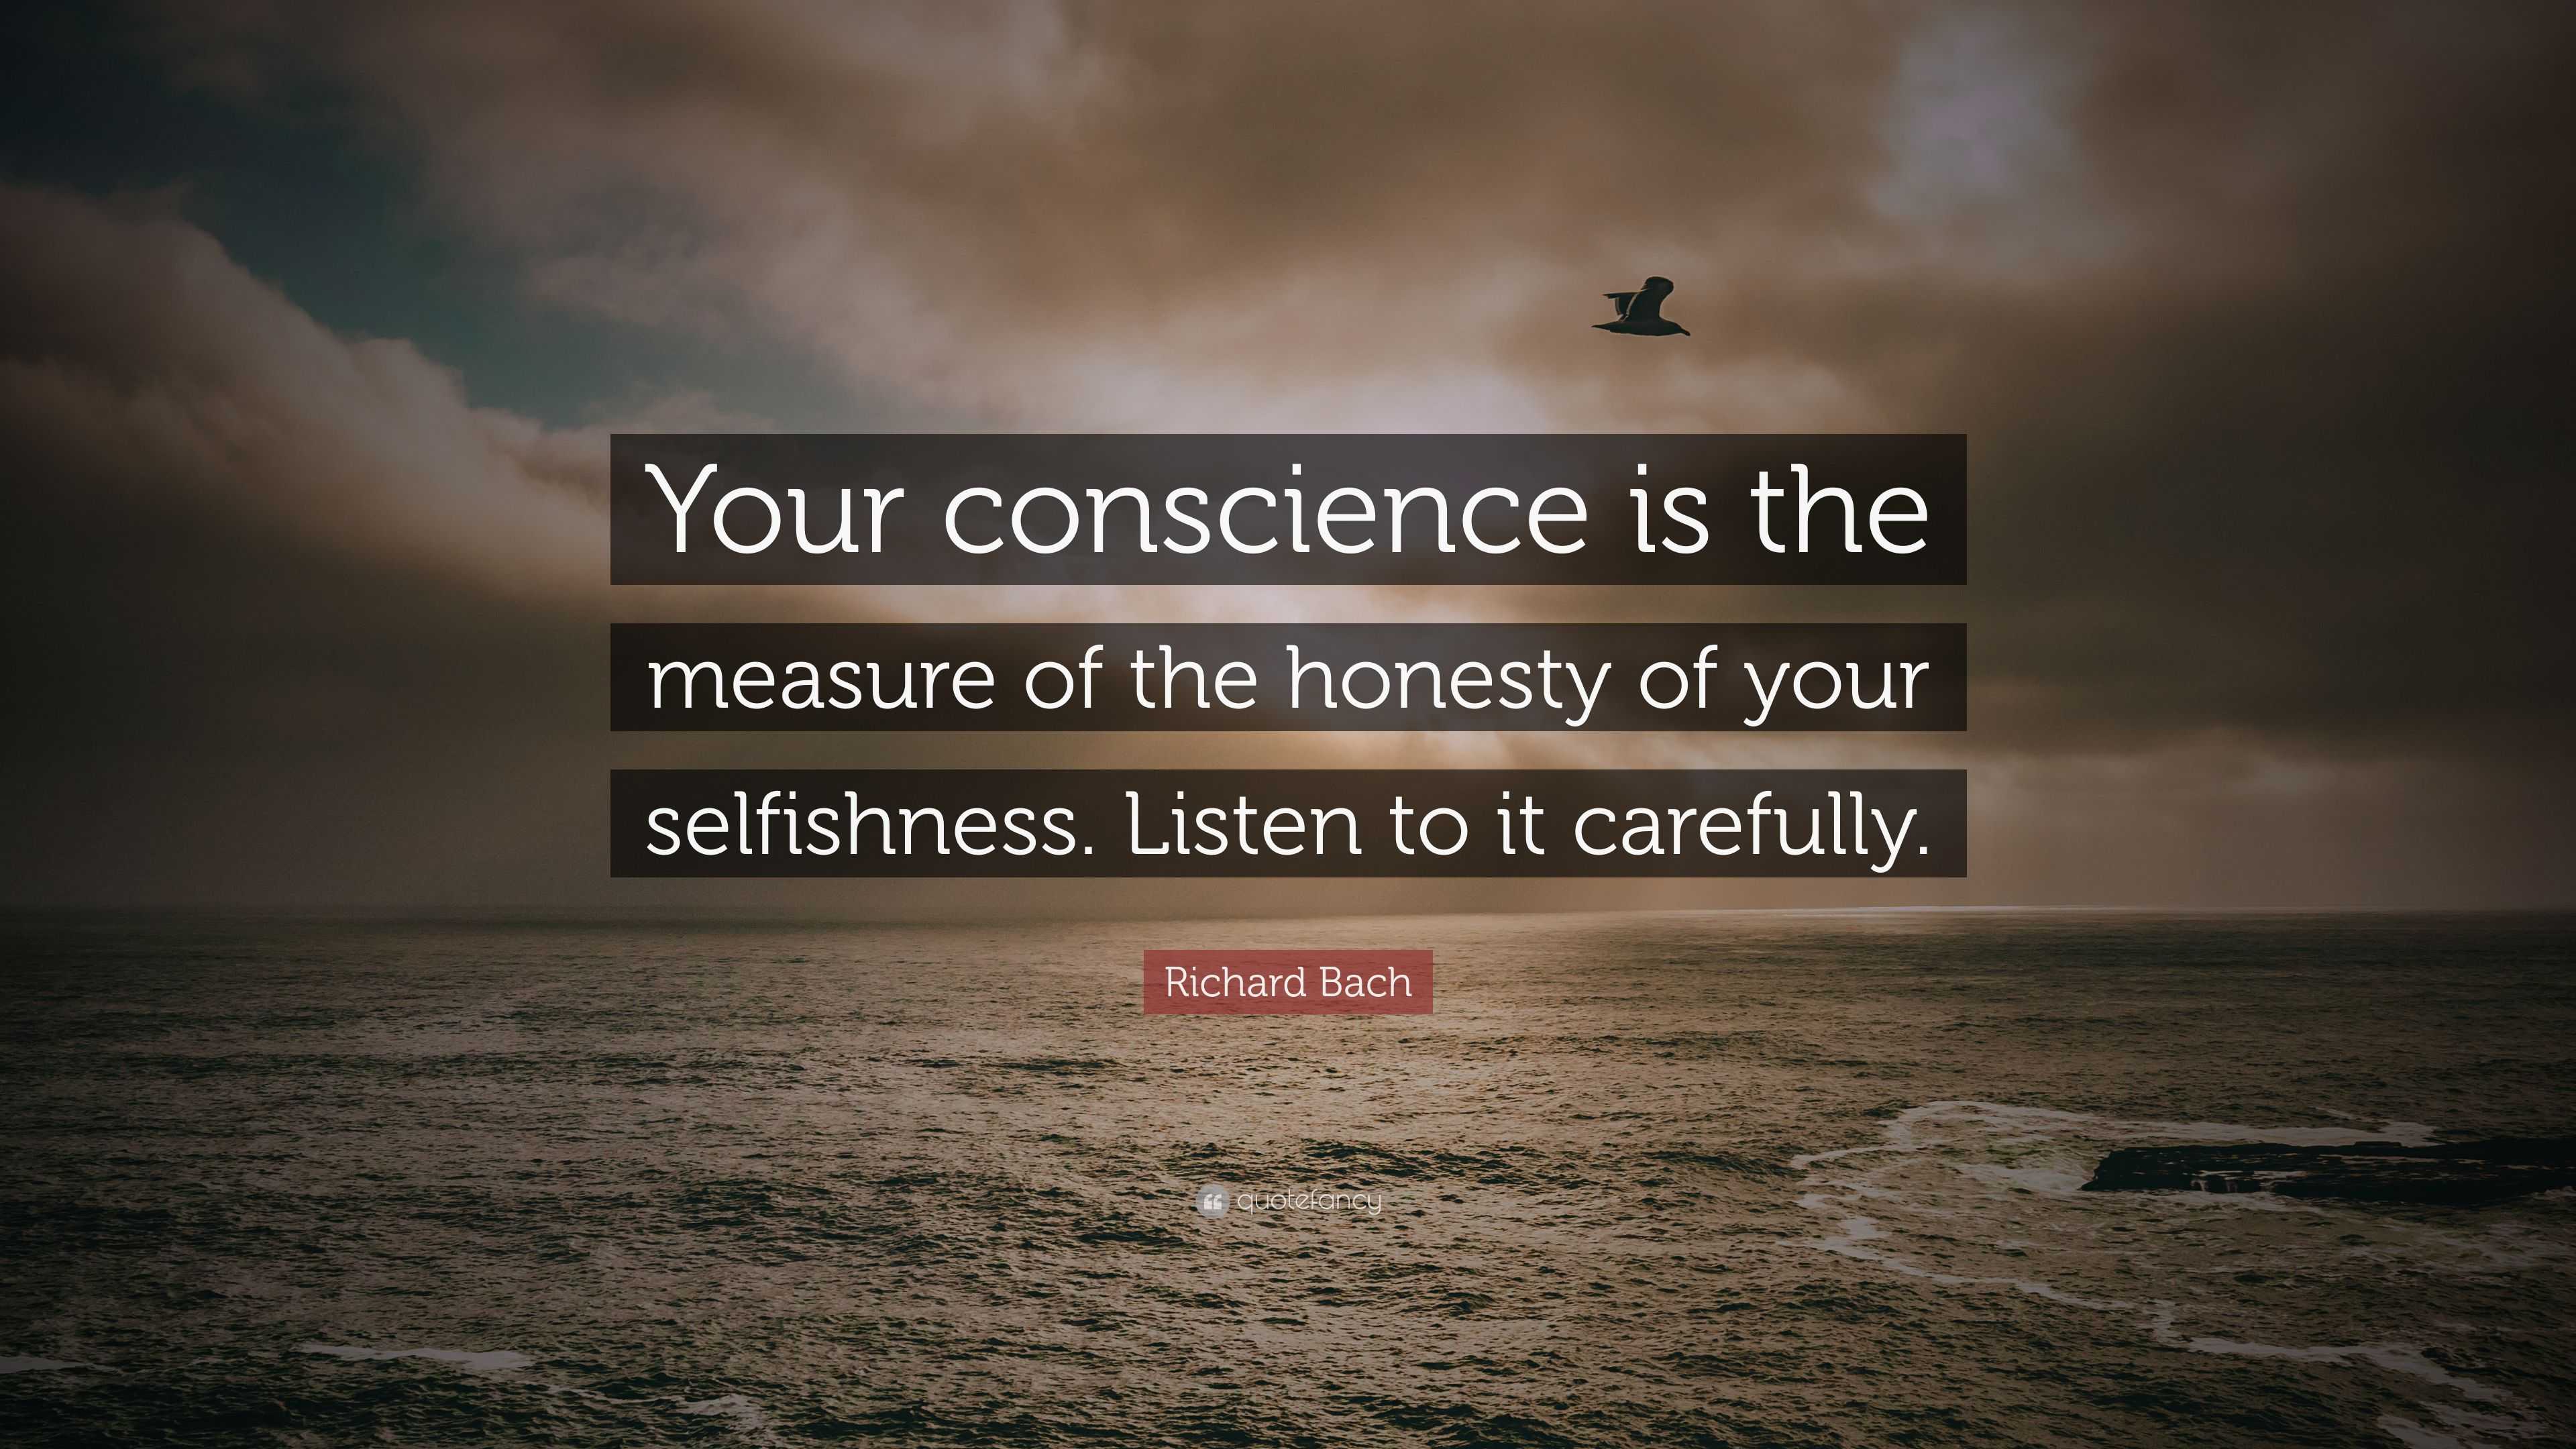 Richard Bach Quote “Your conscience is the measure of the honesty of